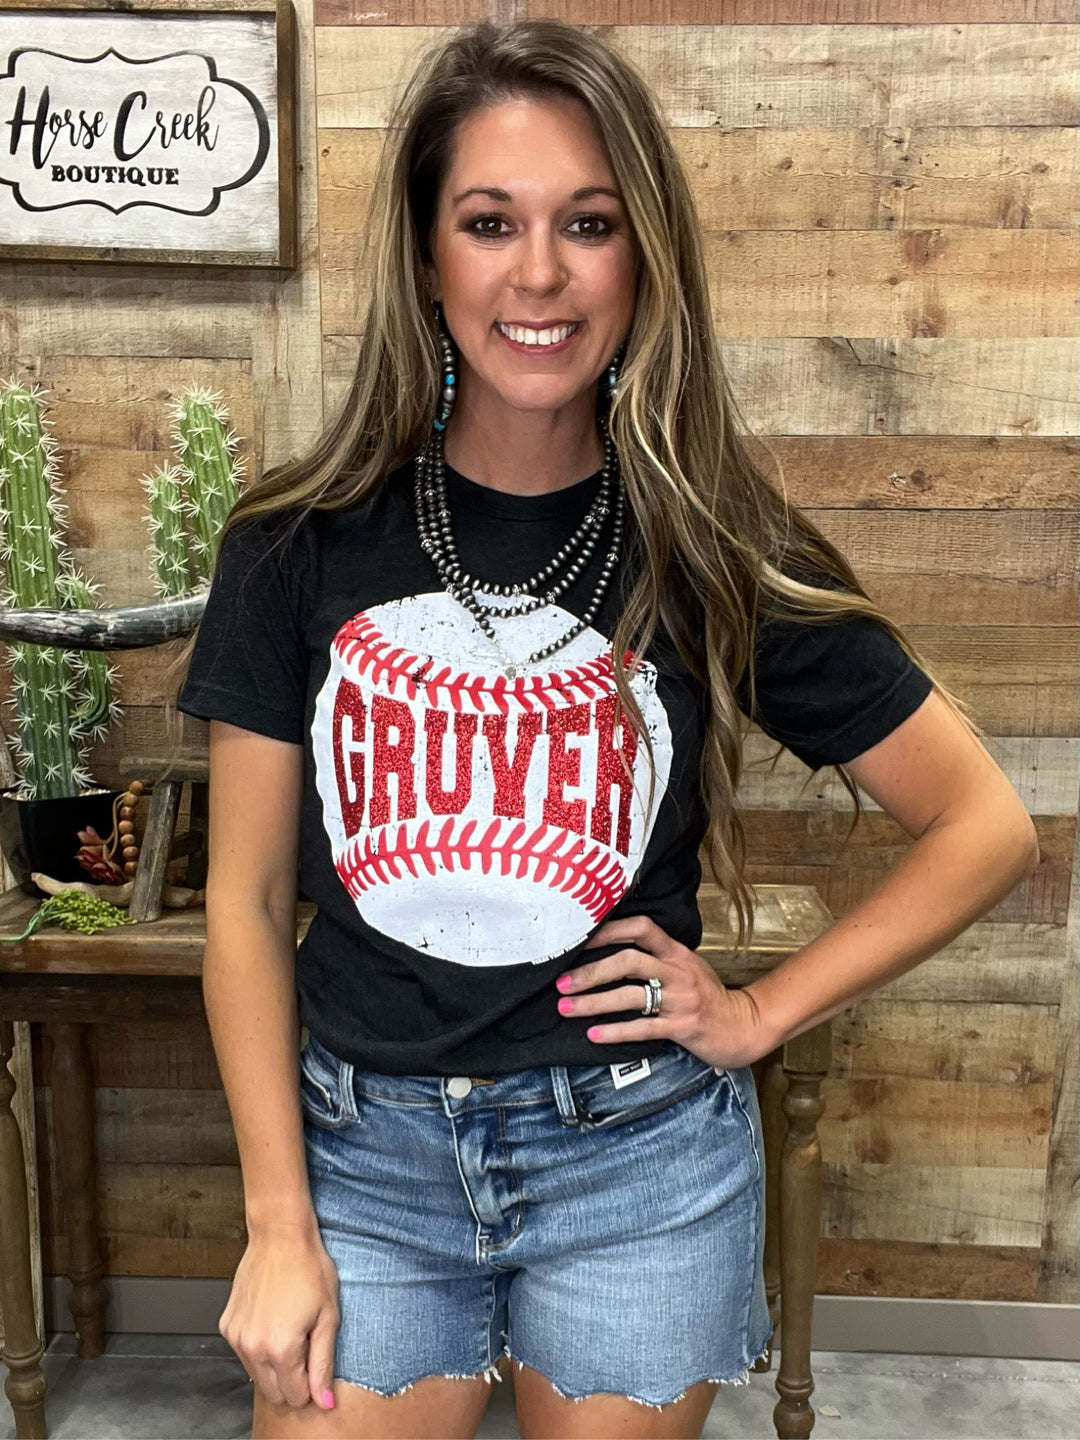 Gruver Baseball Graphic Tee by Texas True Threads